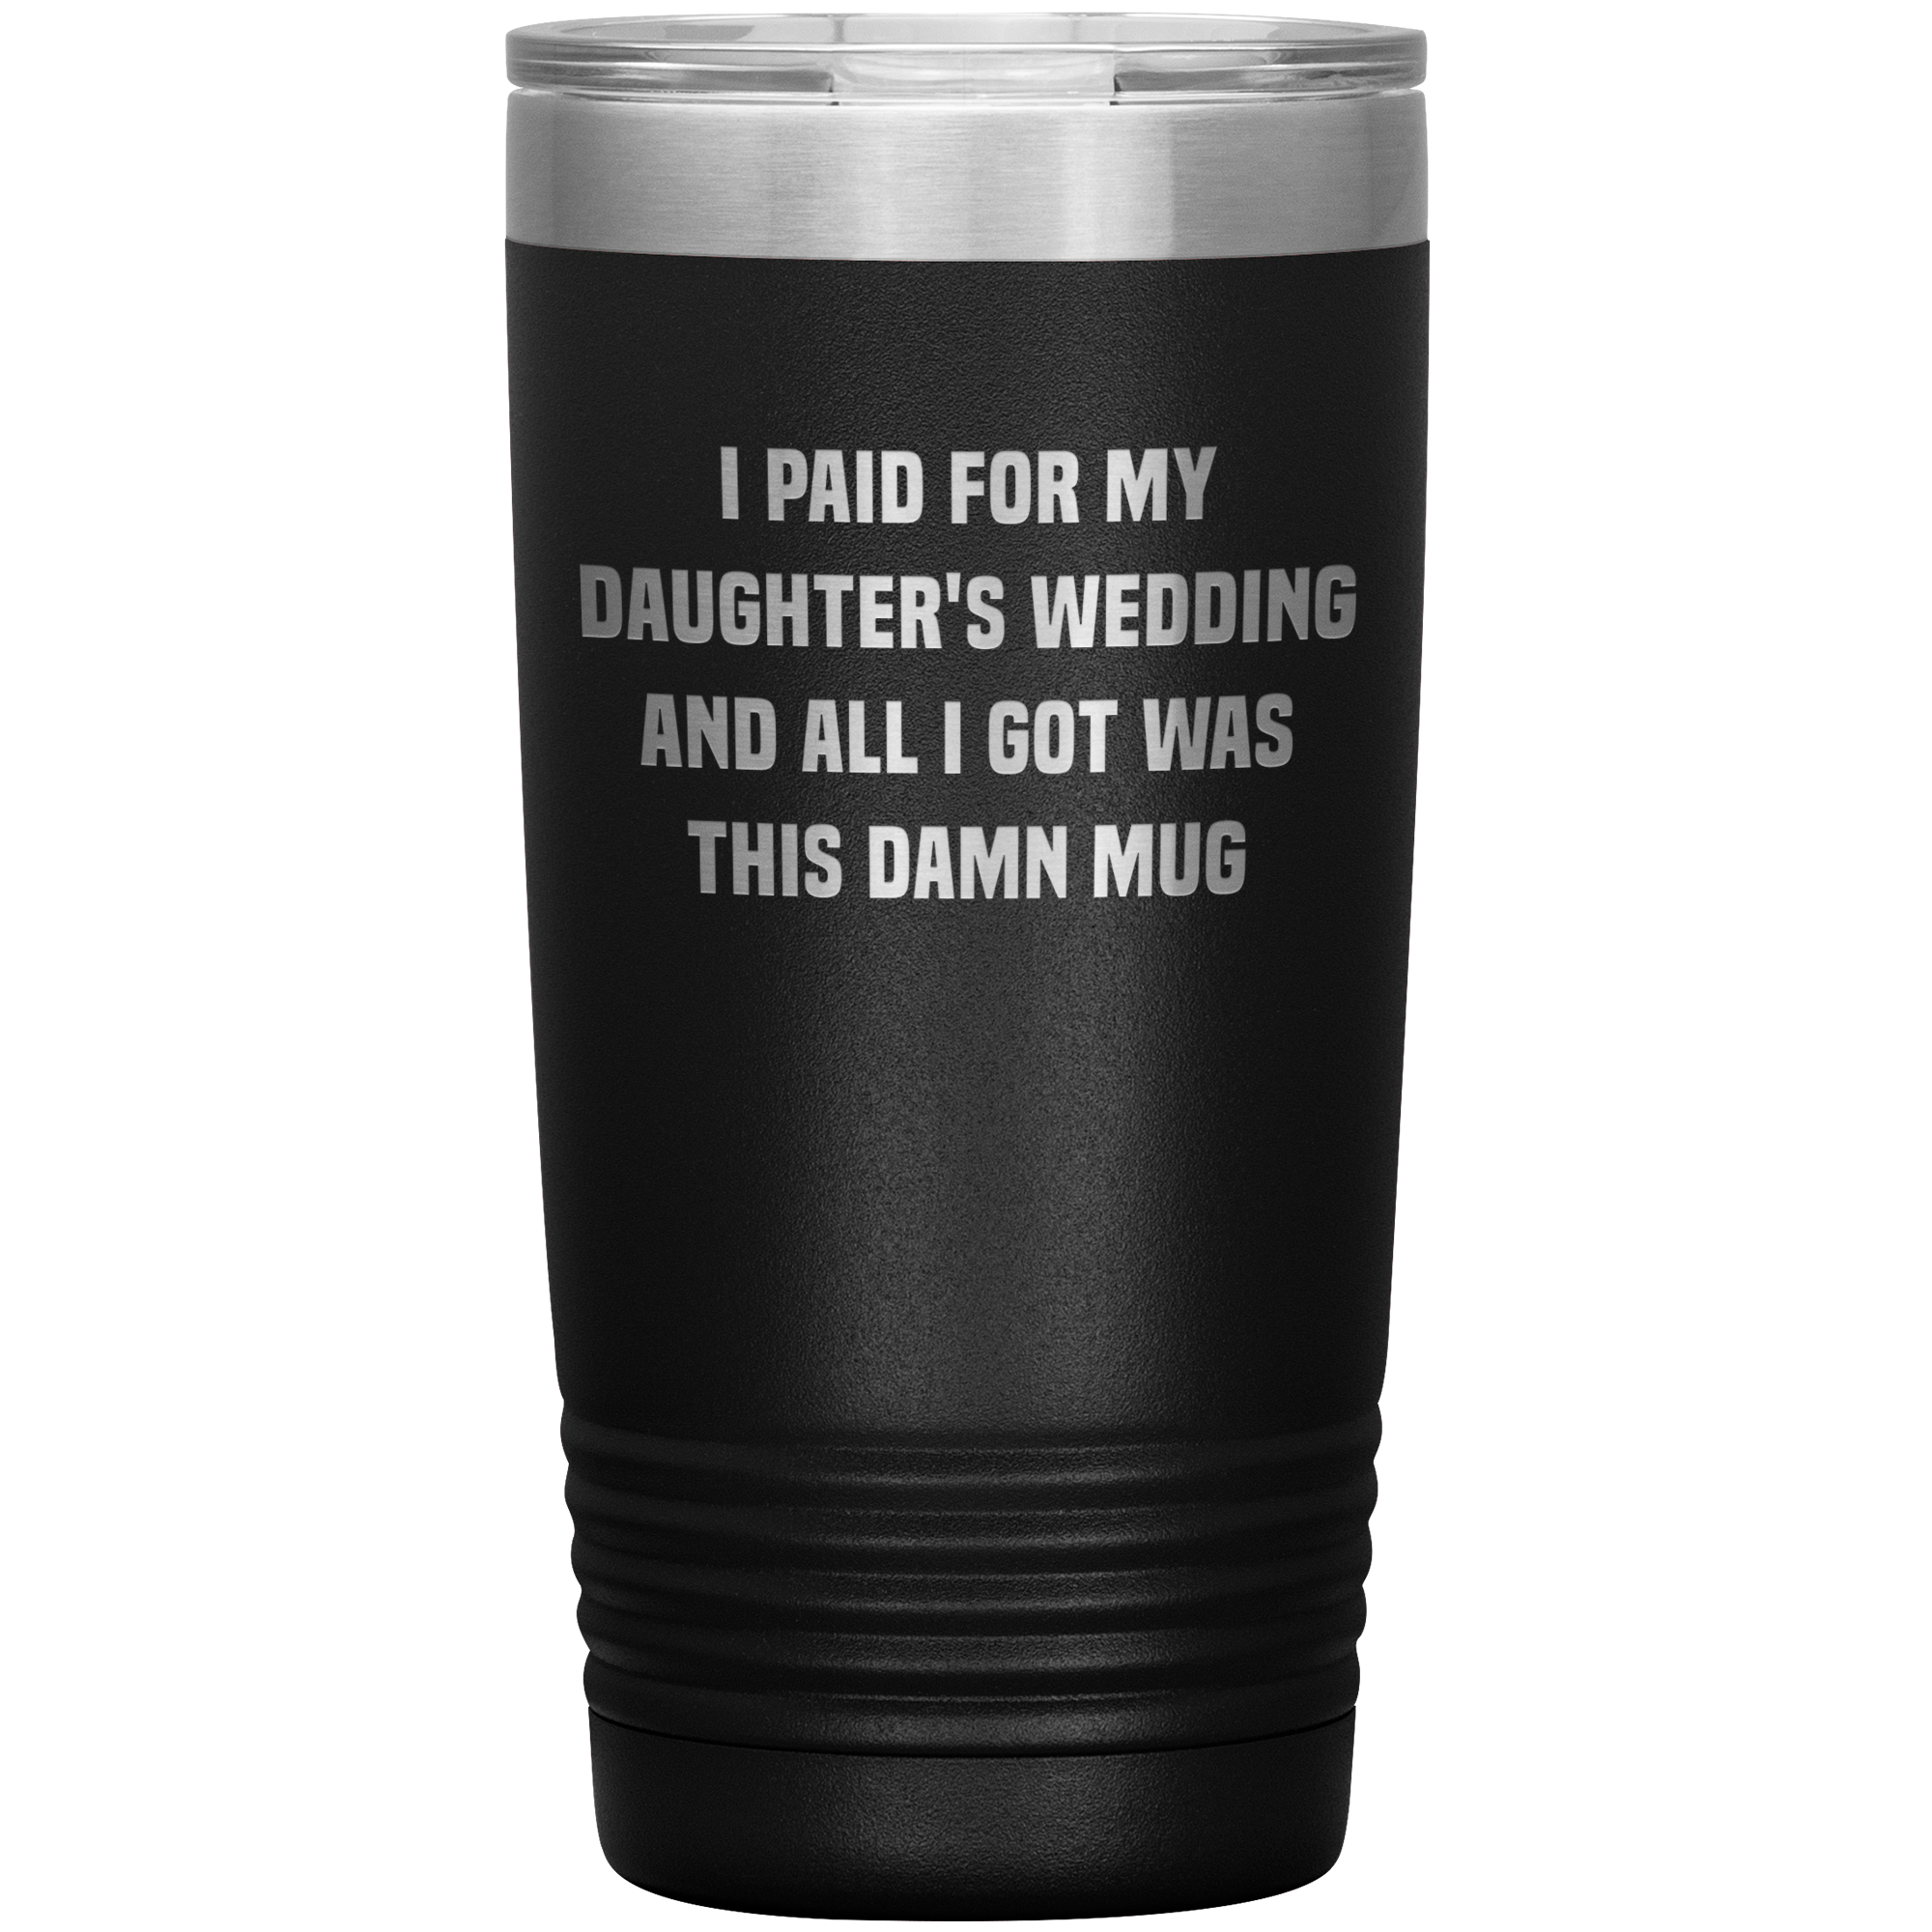 Father of the Bride Gifts Funny Father In Law Gift from Groom Bride's Family Tumbler Metal Mug Insulated Hot Cold Travel Cup 20oz BPA Free